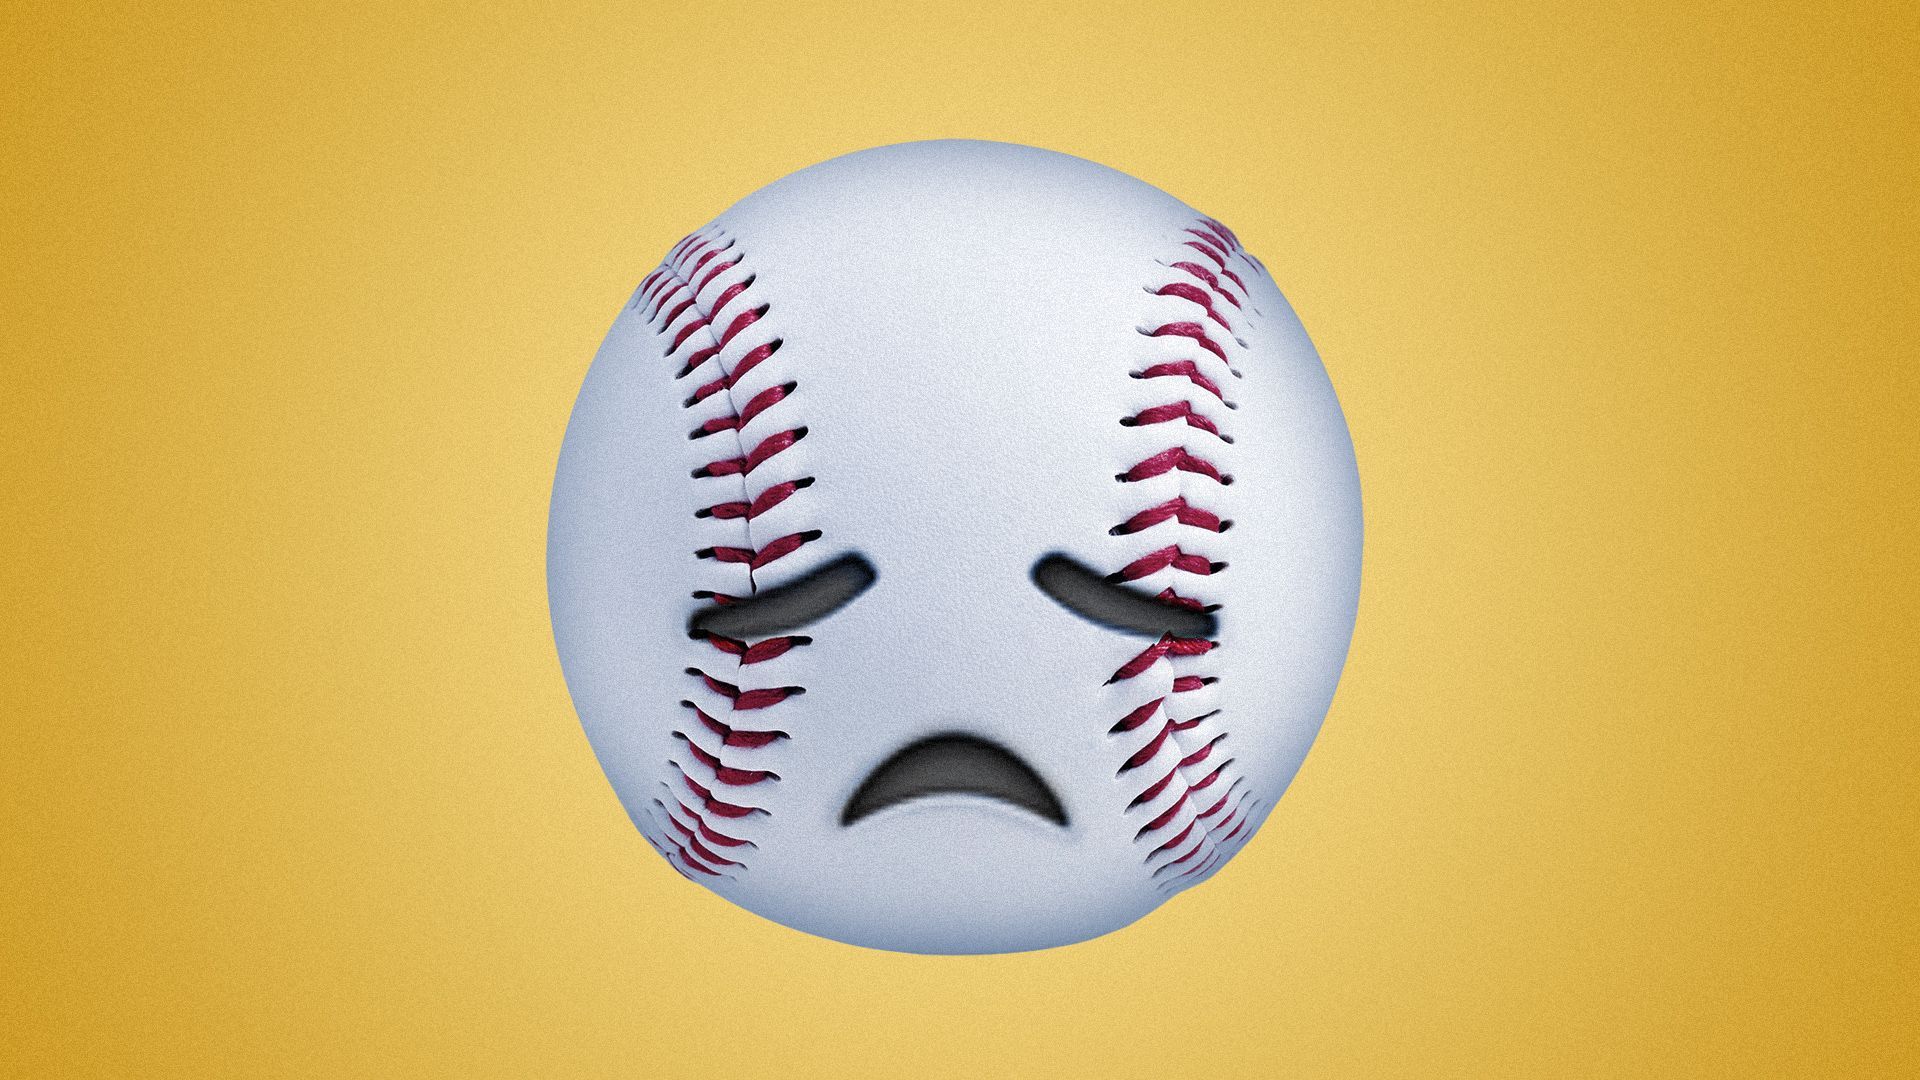 Illustration of a baseball stylized as a disappointed emoji. 